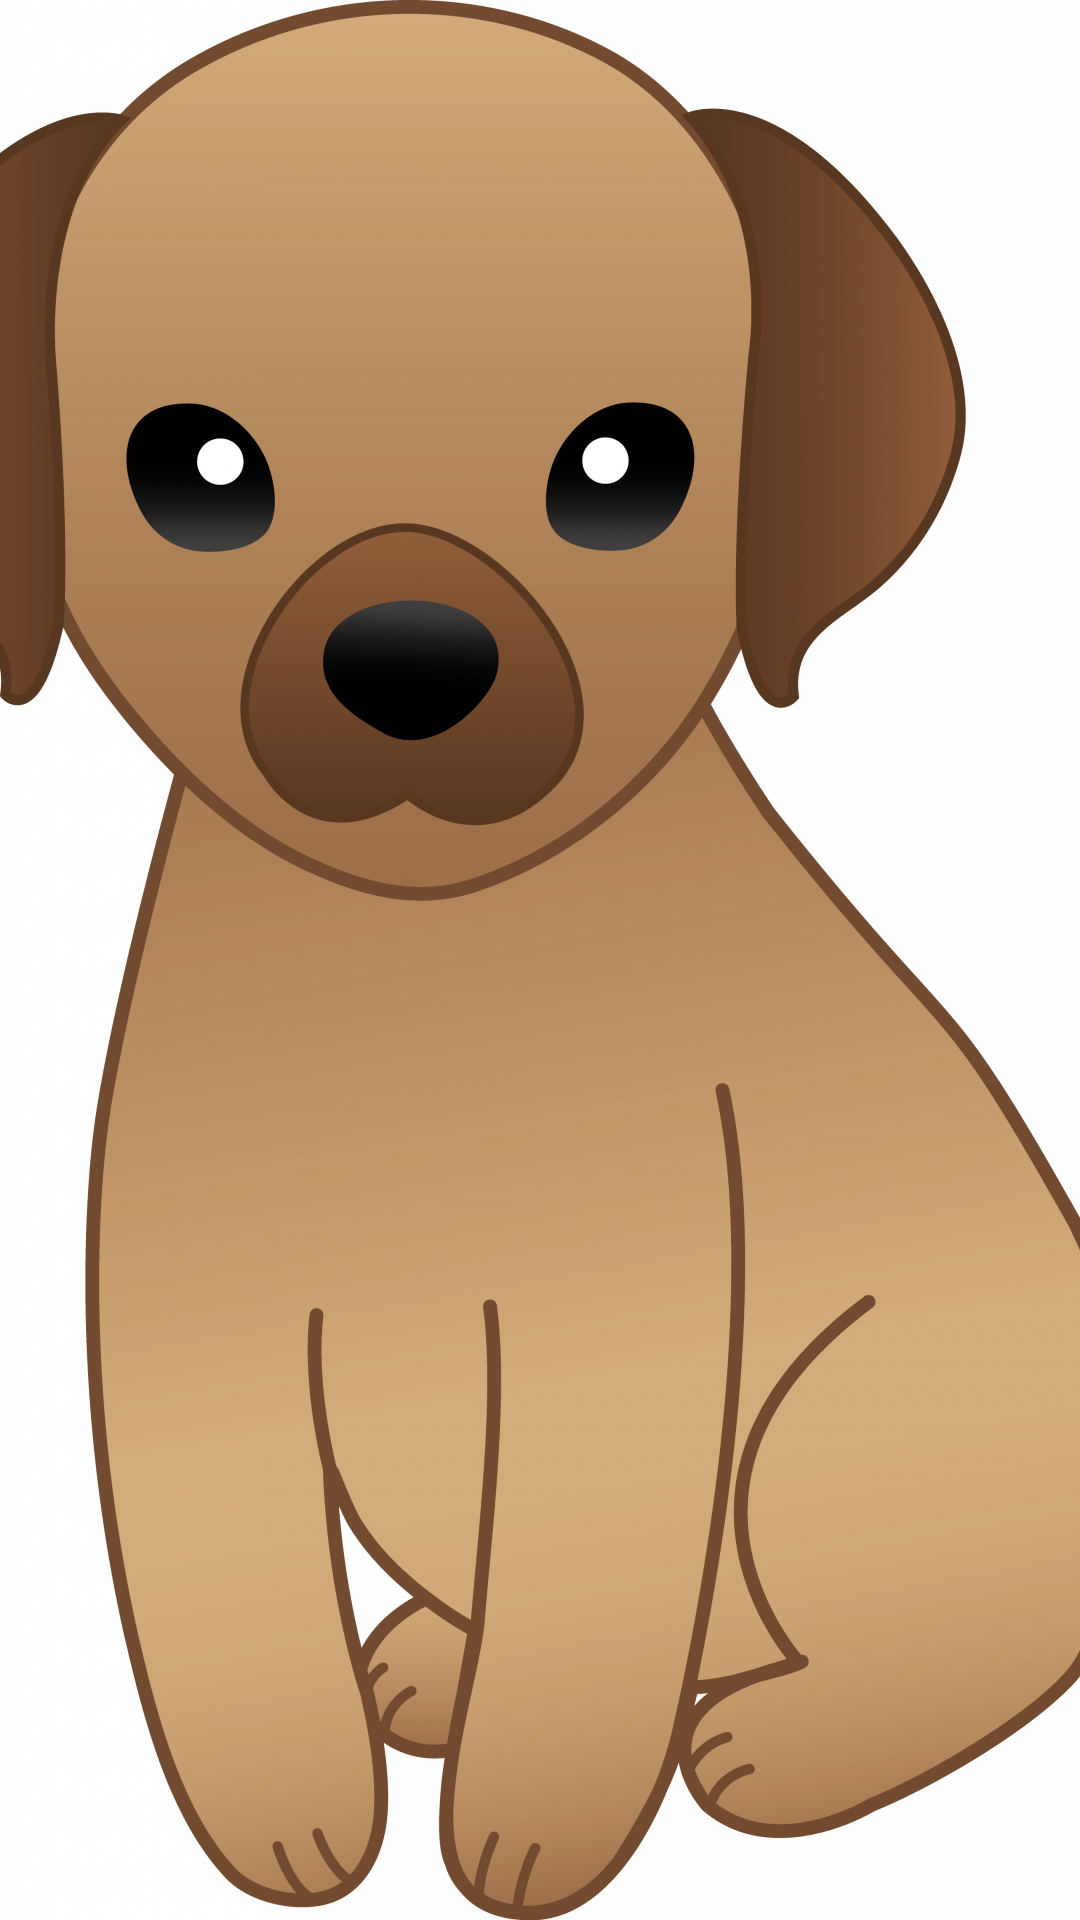 Free download Cute Animated Dog Download Clip Art Clip Art on [3402x4650] for your Desktop, Mobile & Tablet. Explore Cute Anime Dogs Wallpaper. Cute Anime Dogs Wallpaper, Cute Dogs